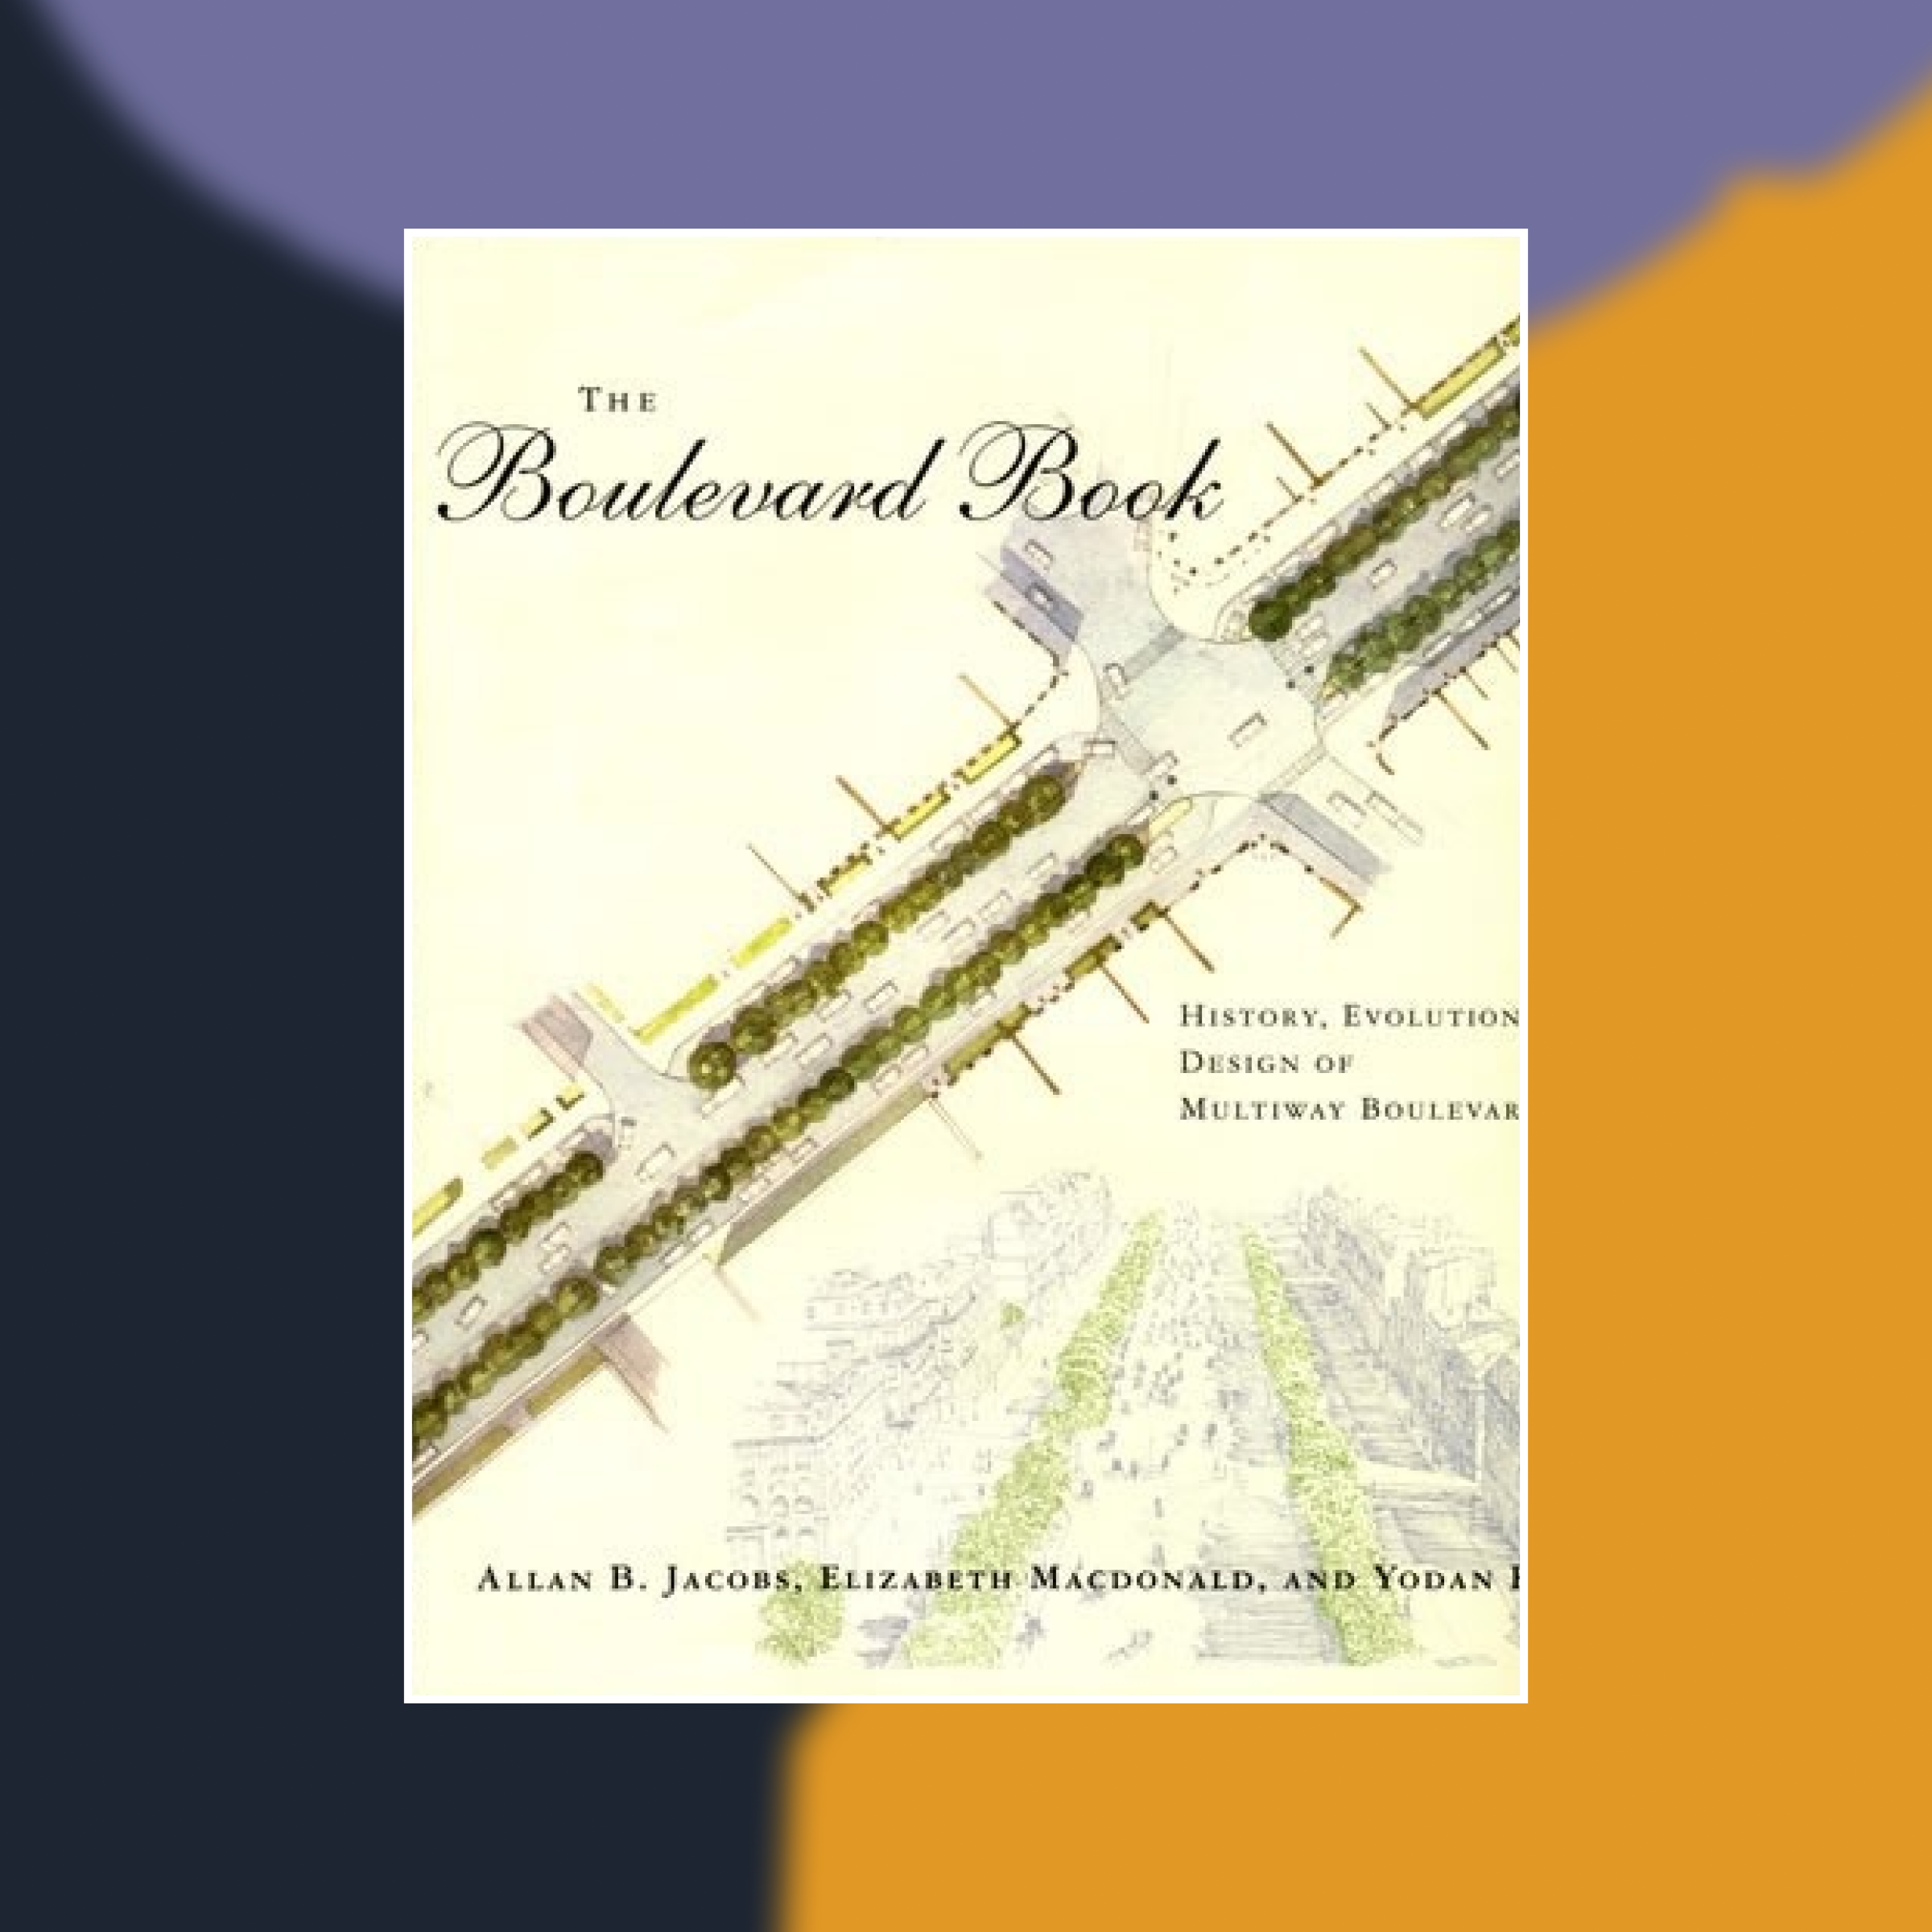 Book cover of The Boulevard Book against an abstract painted background